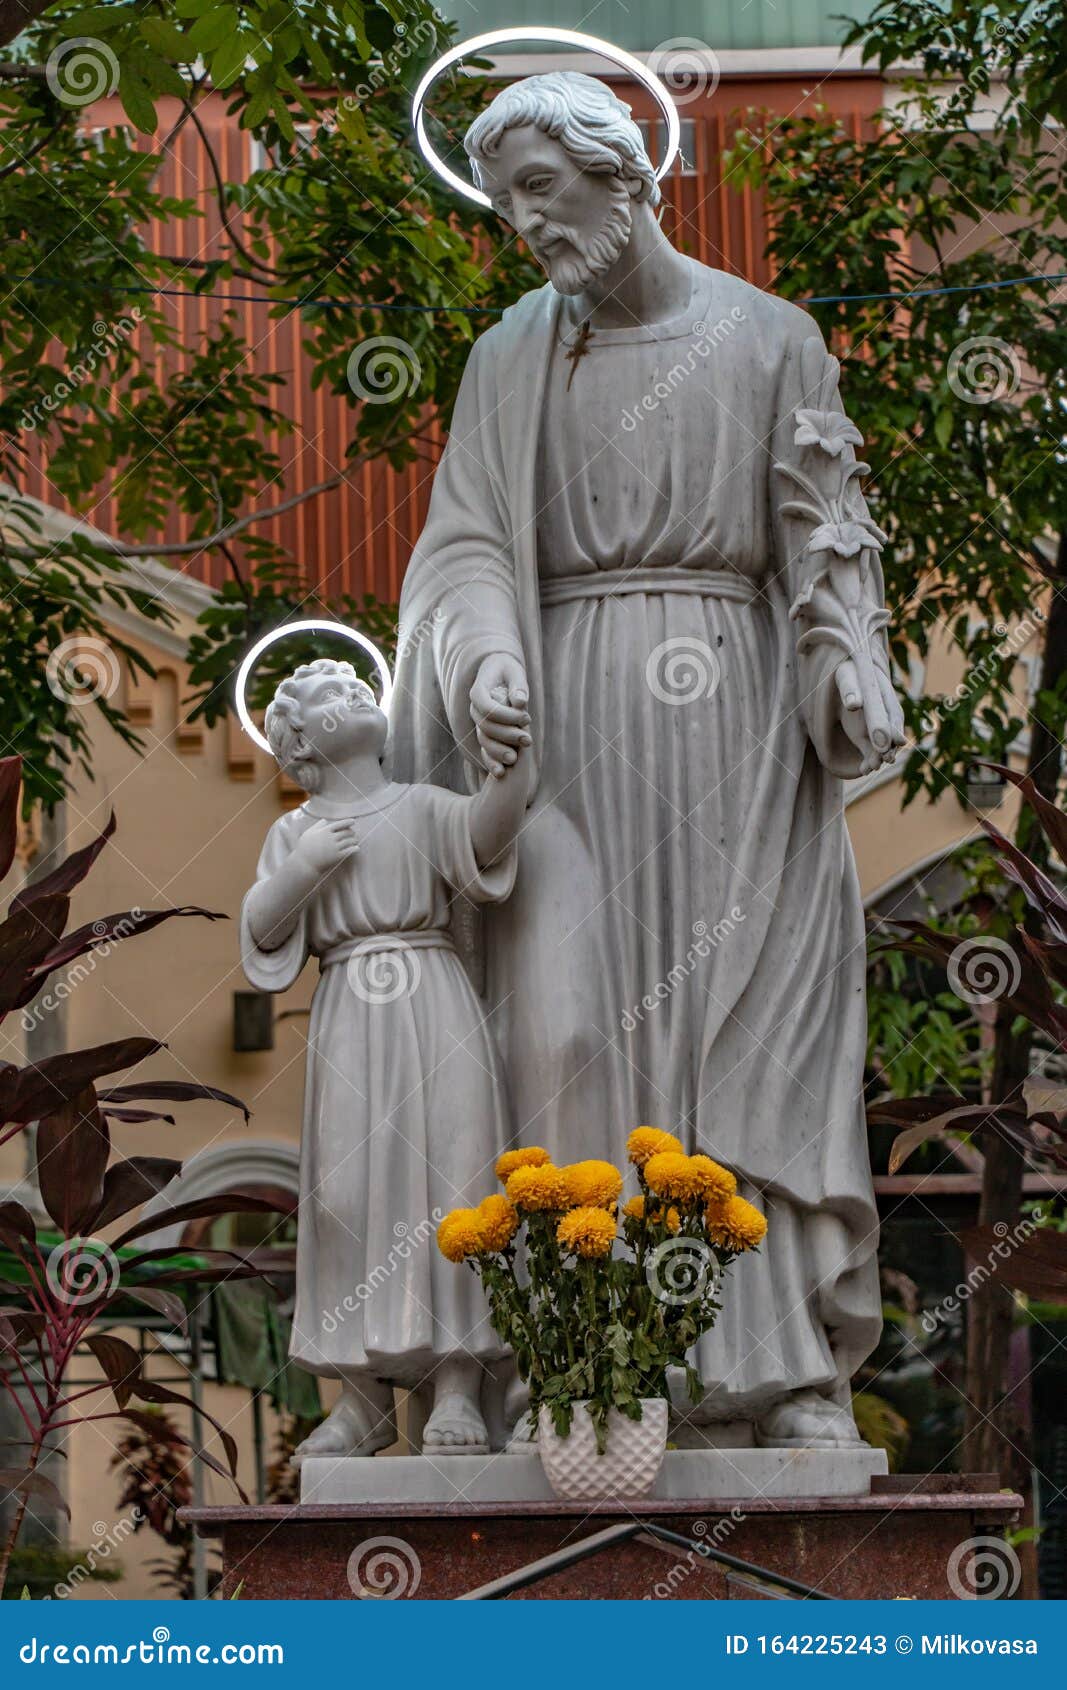 737 Statue St Joseph Photos Free Royalty Free Stock Photos From Dreamstime